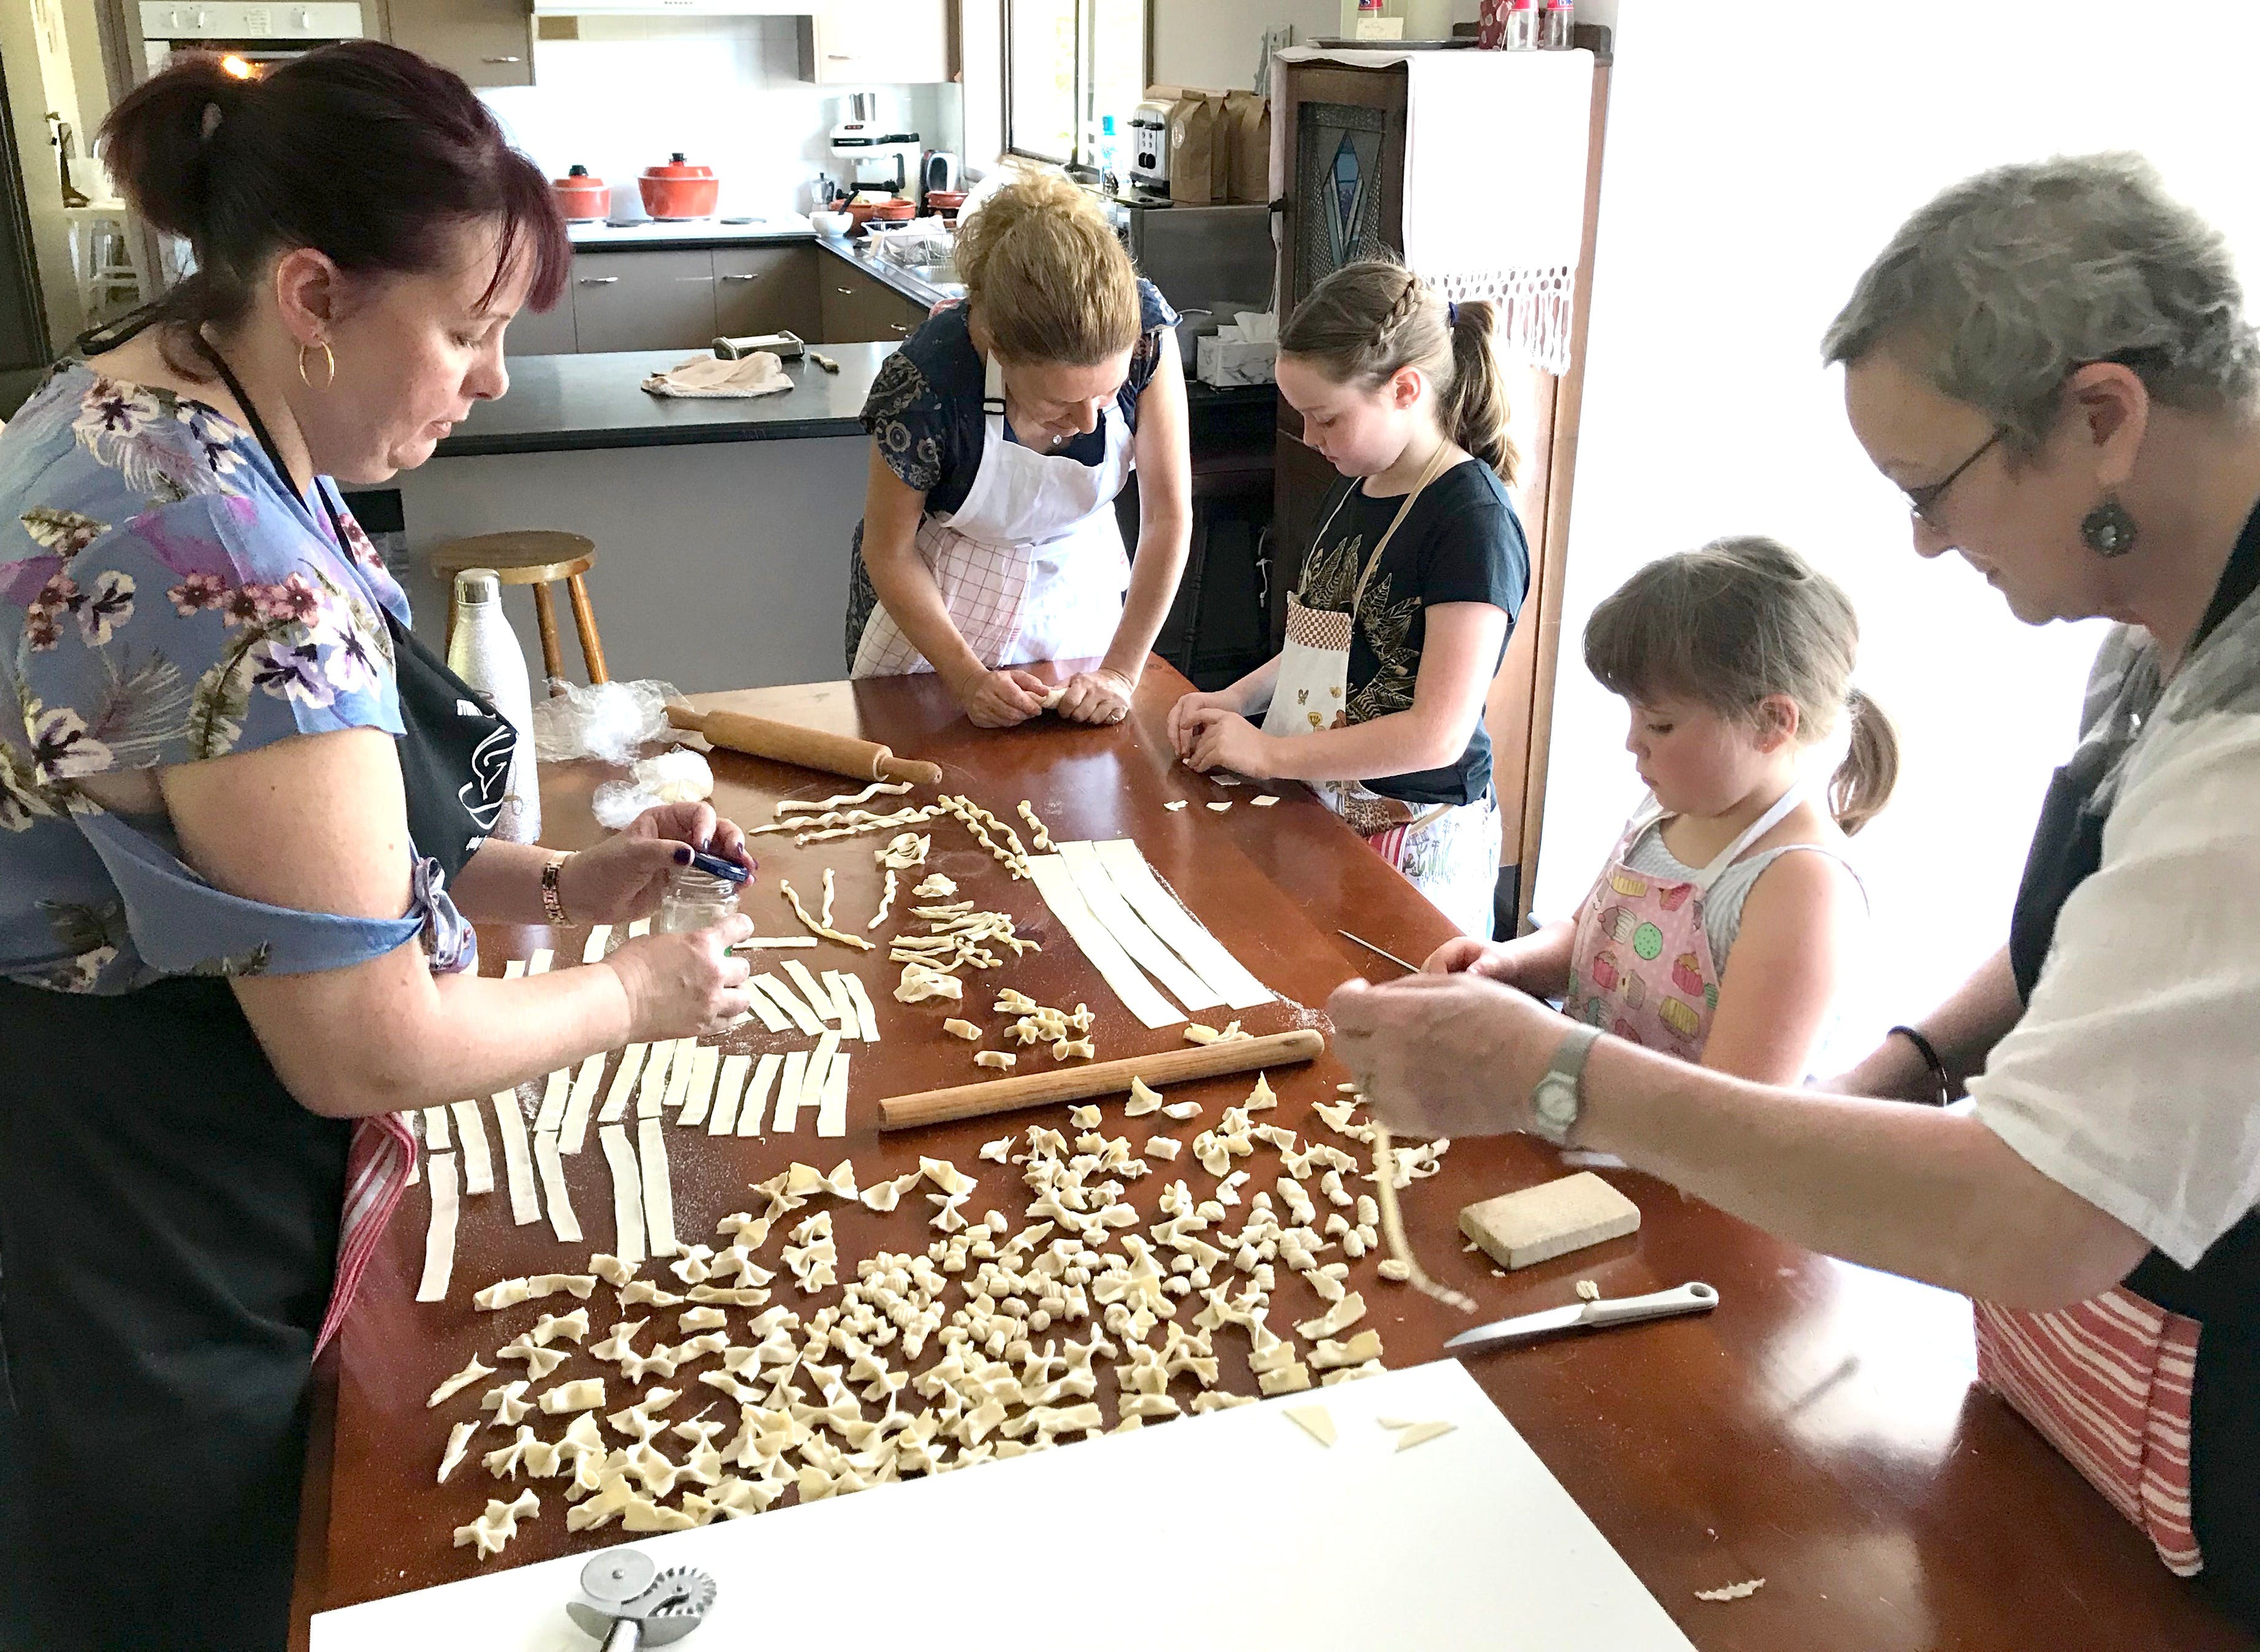 Kids Pasta Making Class - hands on fun at your house - Accommodation Gladstone